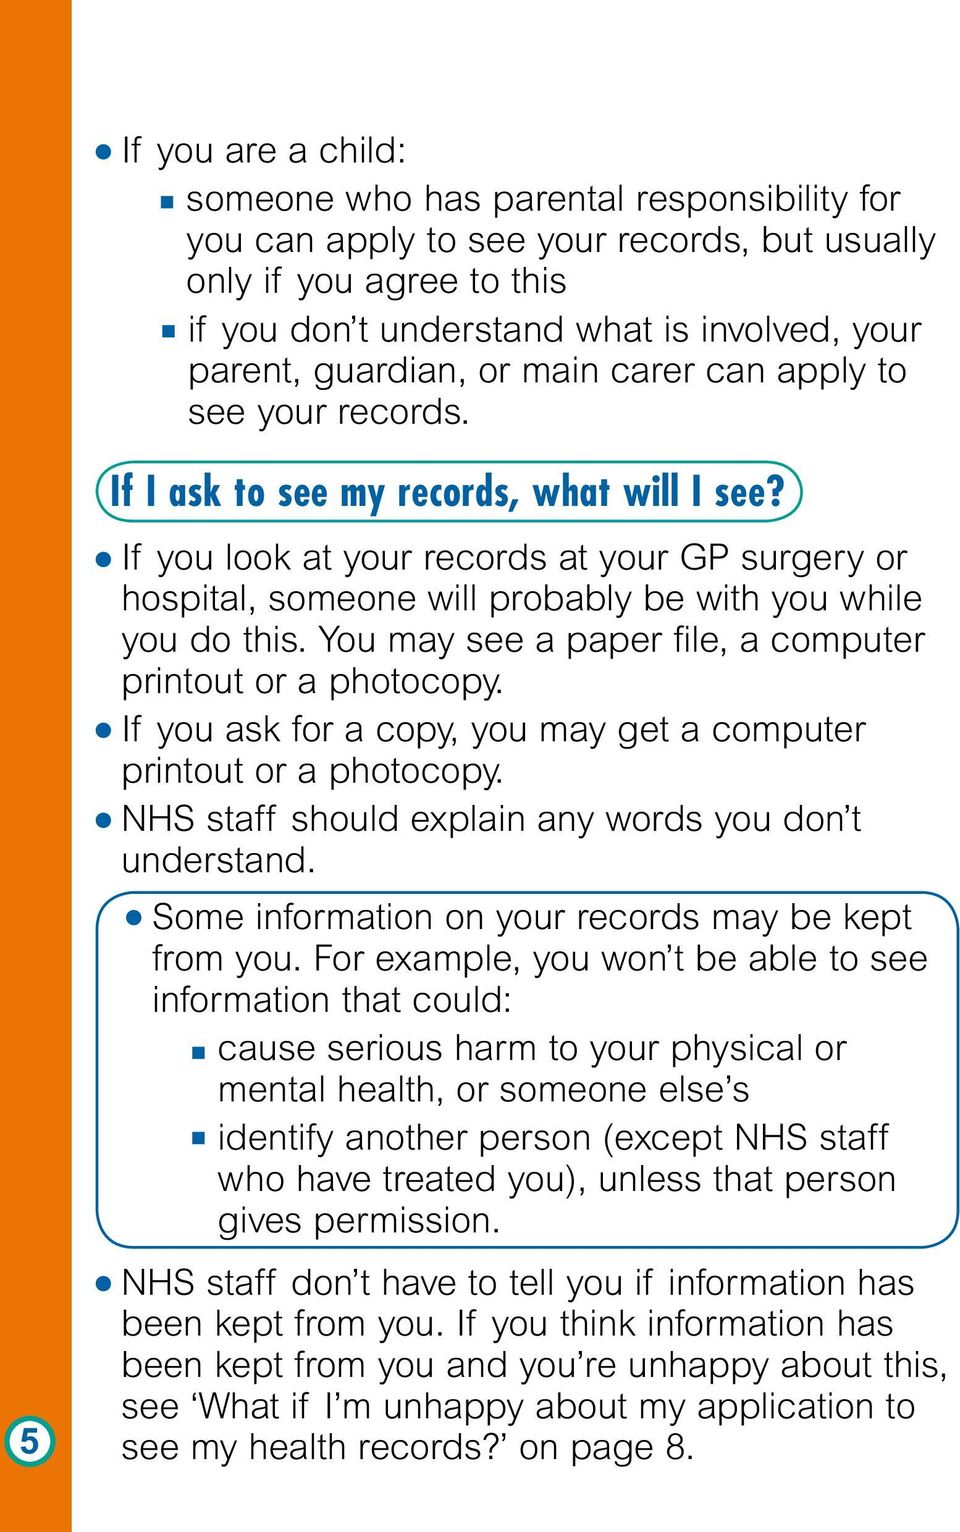 If you look at your records at your GP surgery or hospital, someone will probably be with you while you do this. You may see a paper file, a computer printout or a photocopy.